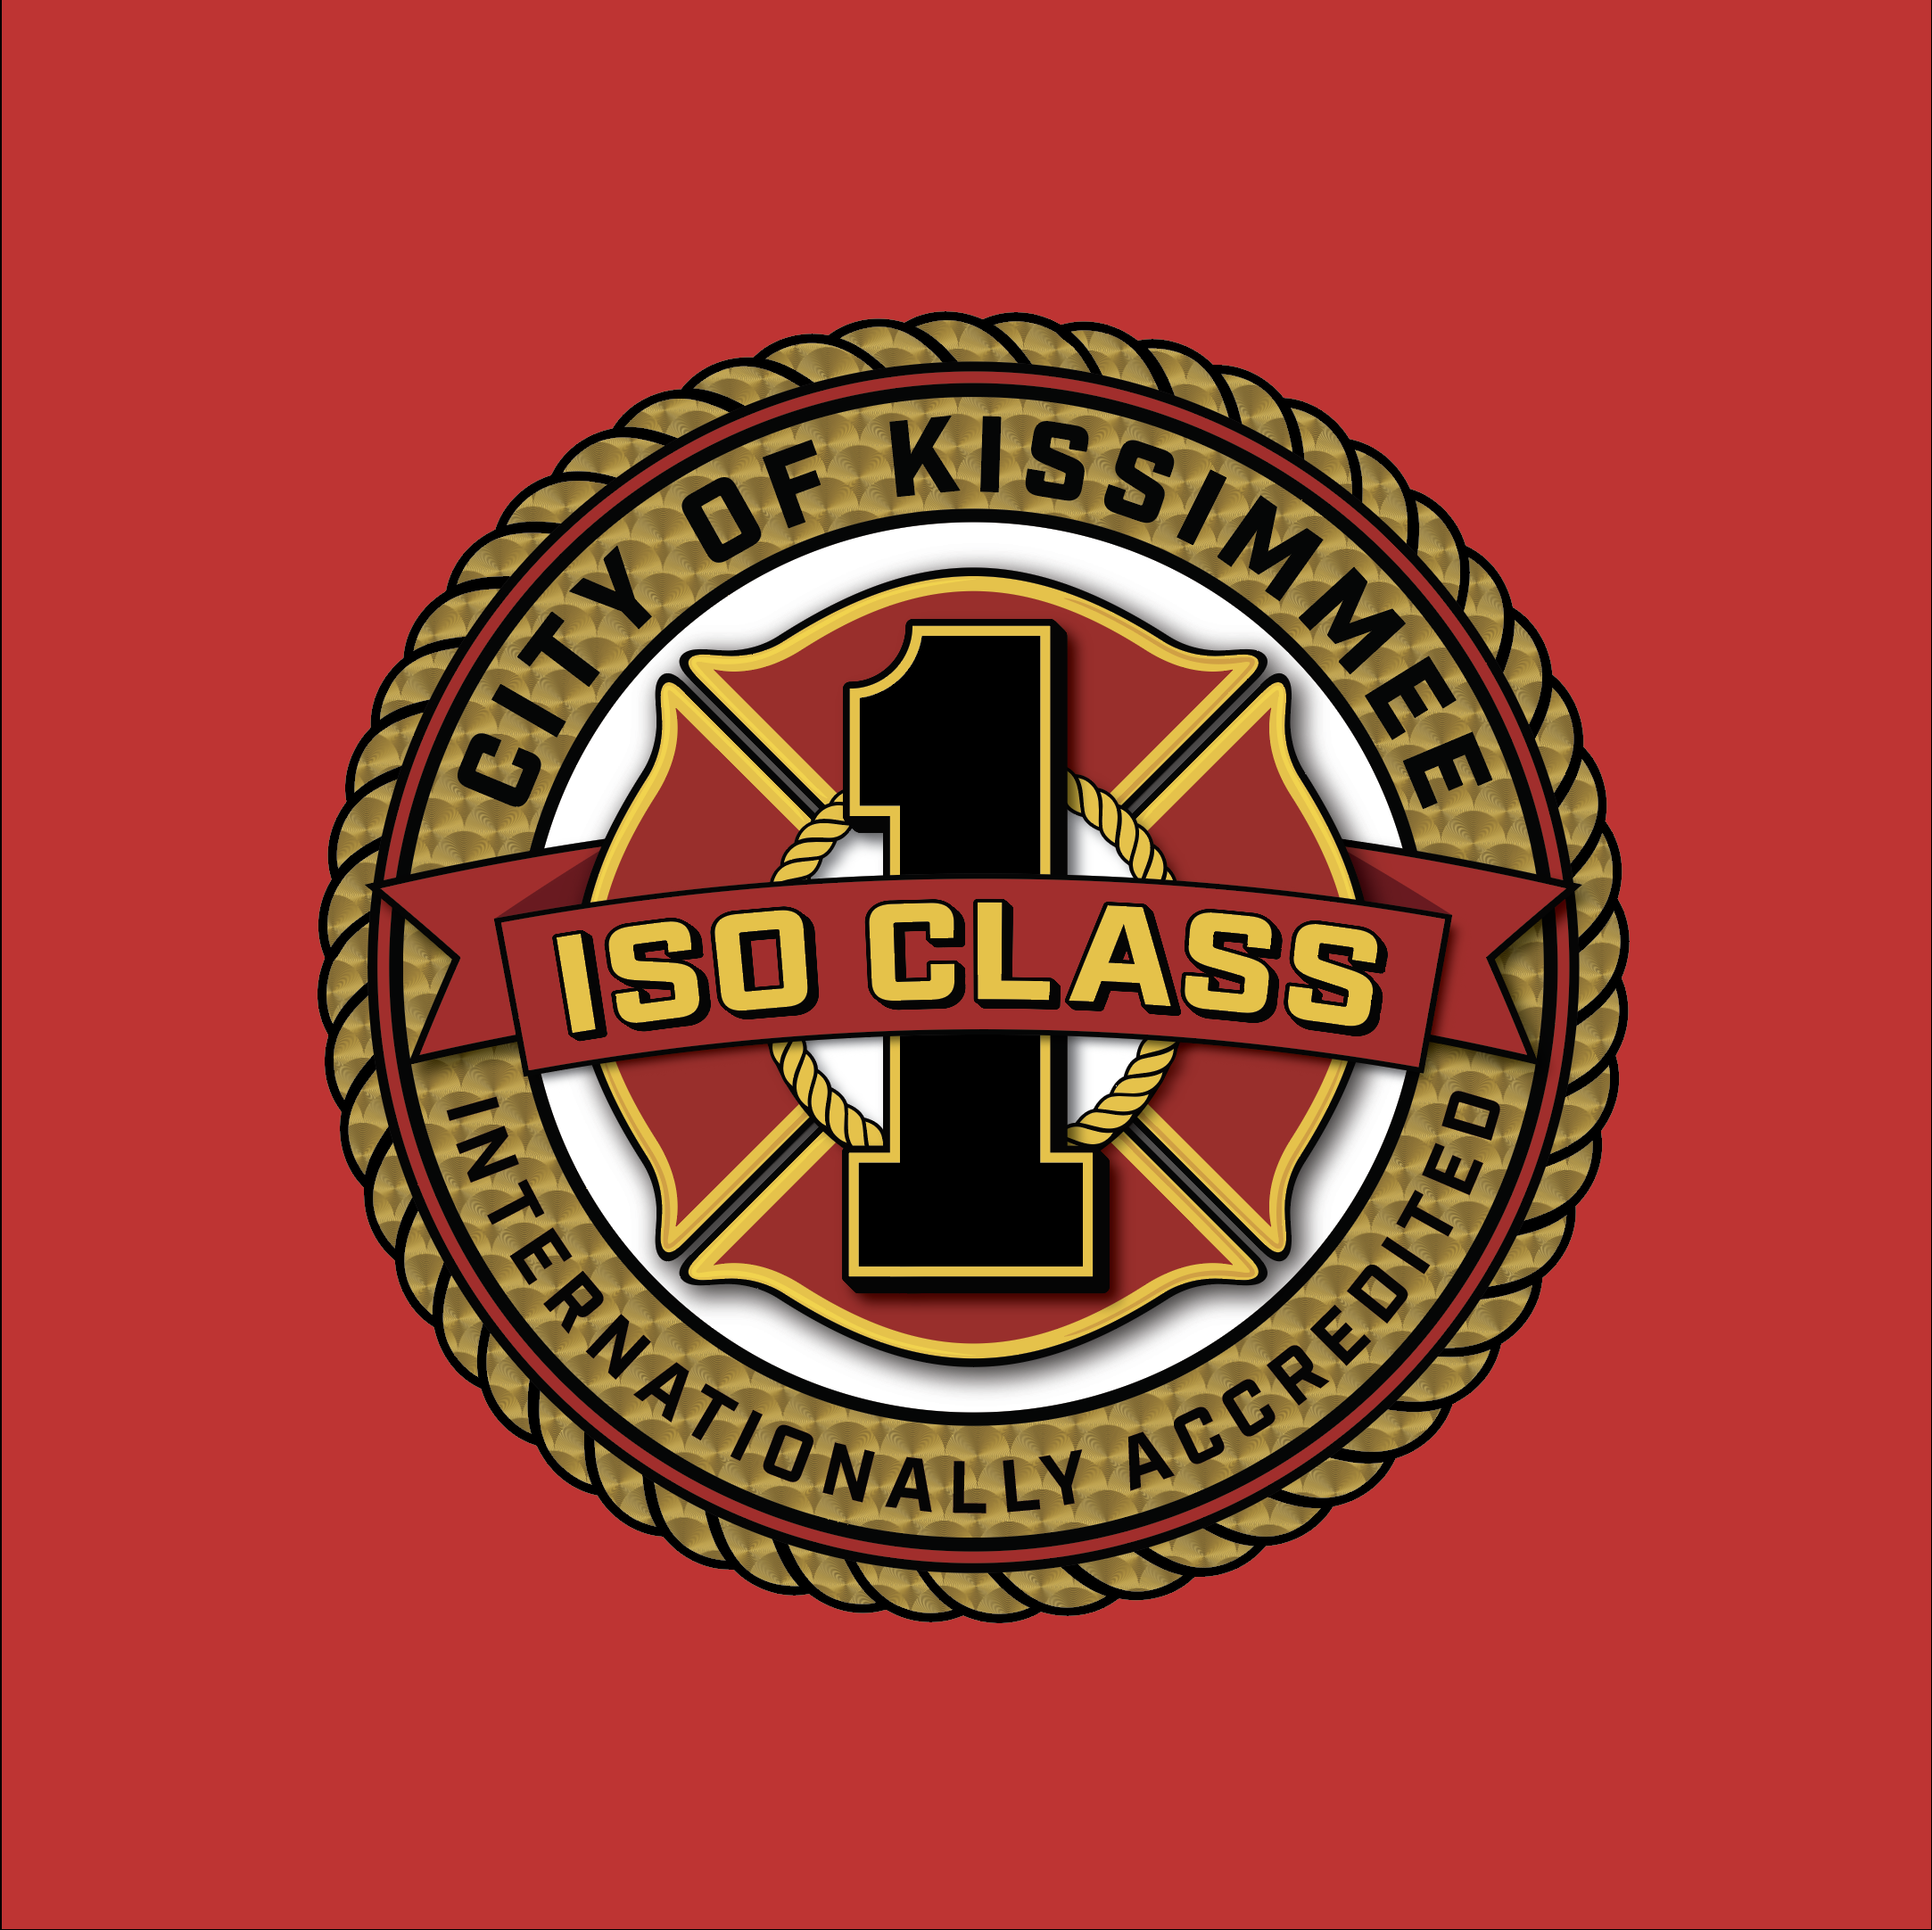 Seal recognizing Kissimmee Fire Department's KFD International Accreditation and ISO Class 1 Status